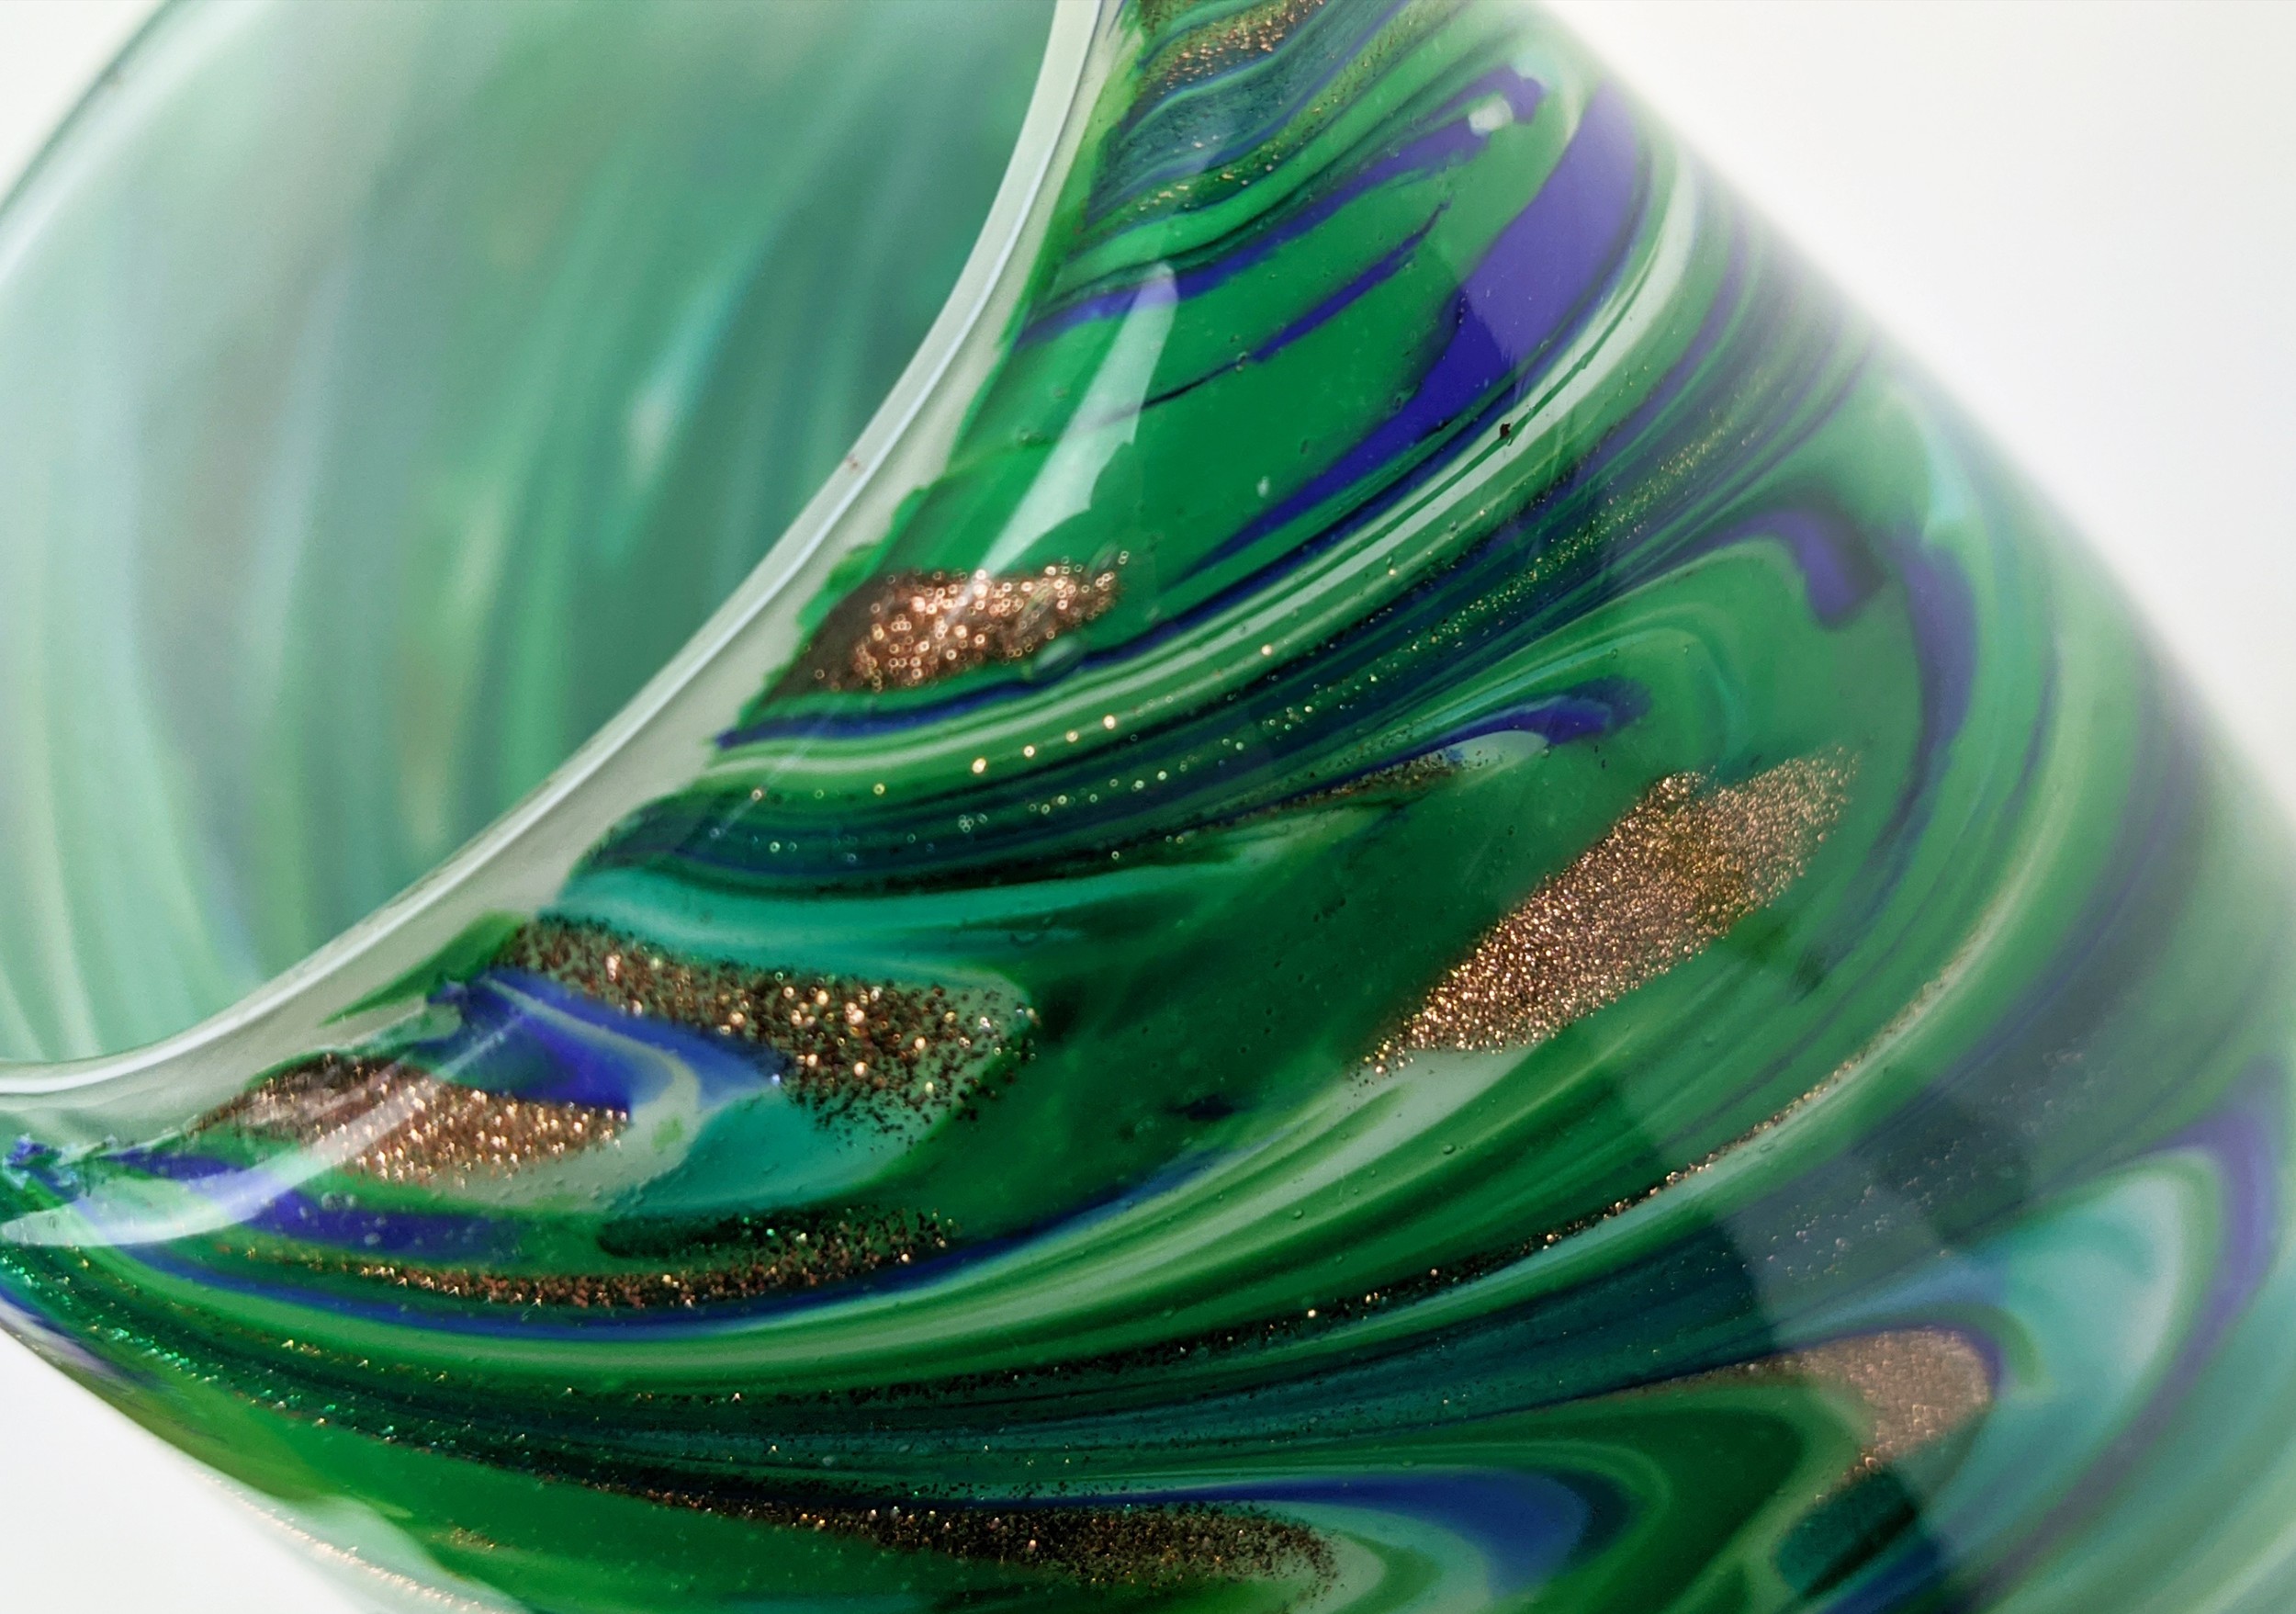 A MURANO GLASS VASE, of ovoid form, with a green, white and blue swirling pattern, gold flecks, 40cm - Image 6 of 7